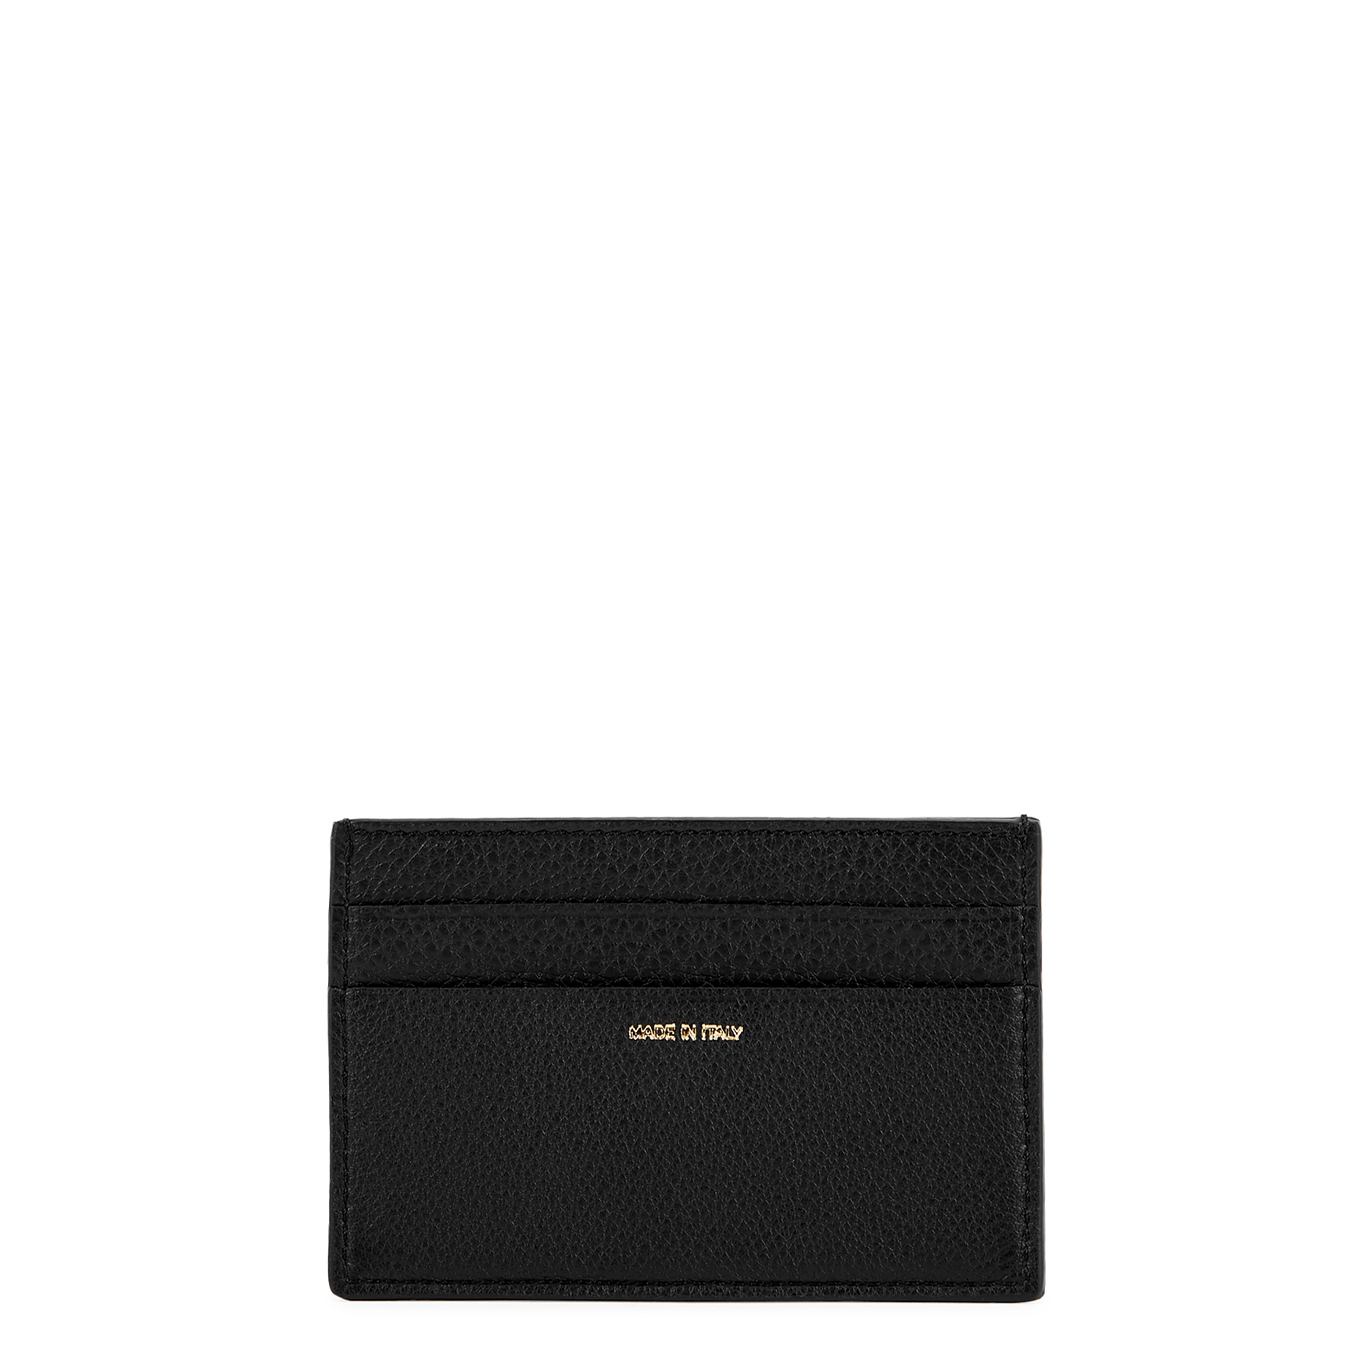 Paul Smith Black Panelled Leather Card Holder